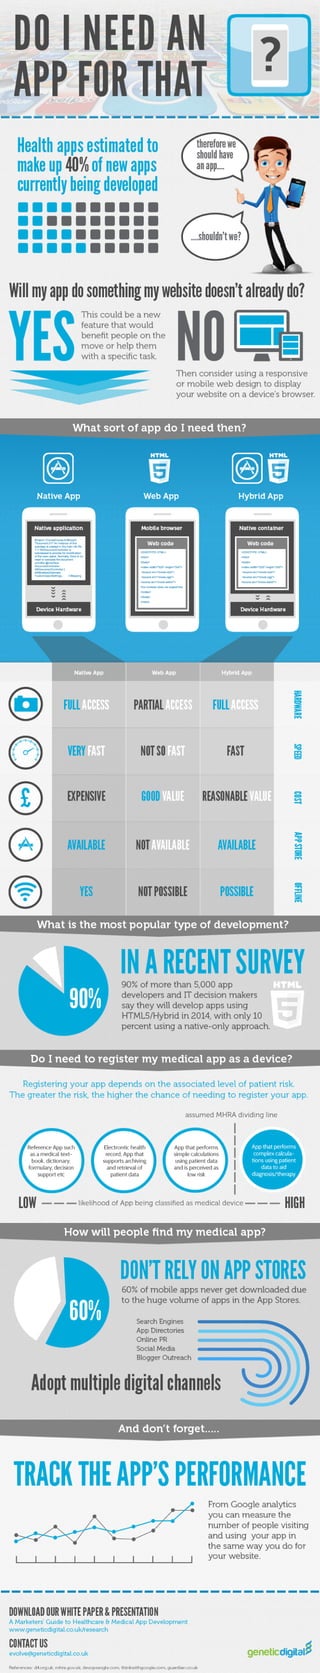 Healthcare & Medical App Inforgraphic: Do I need an app for that?